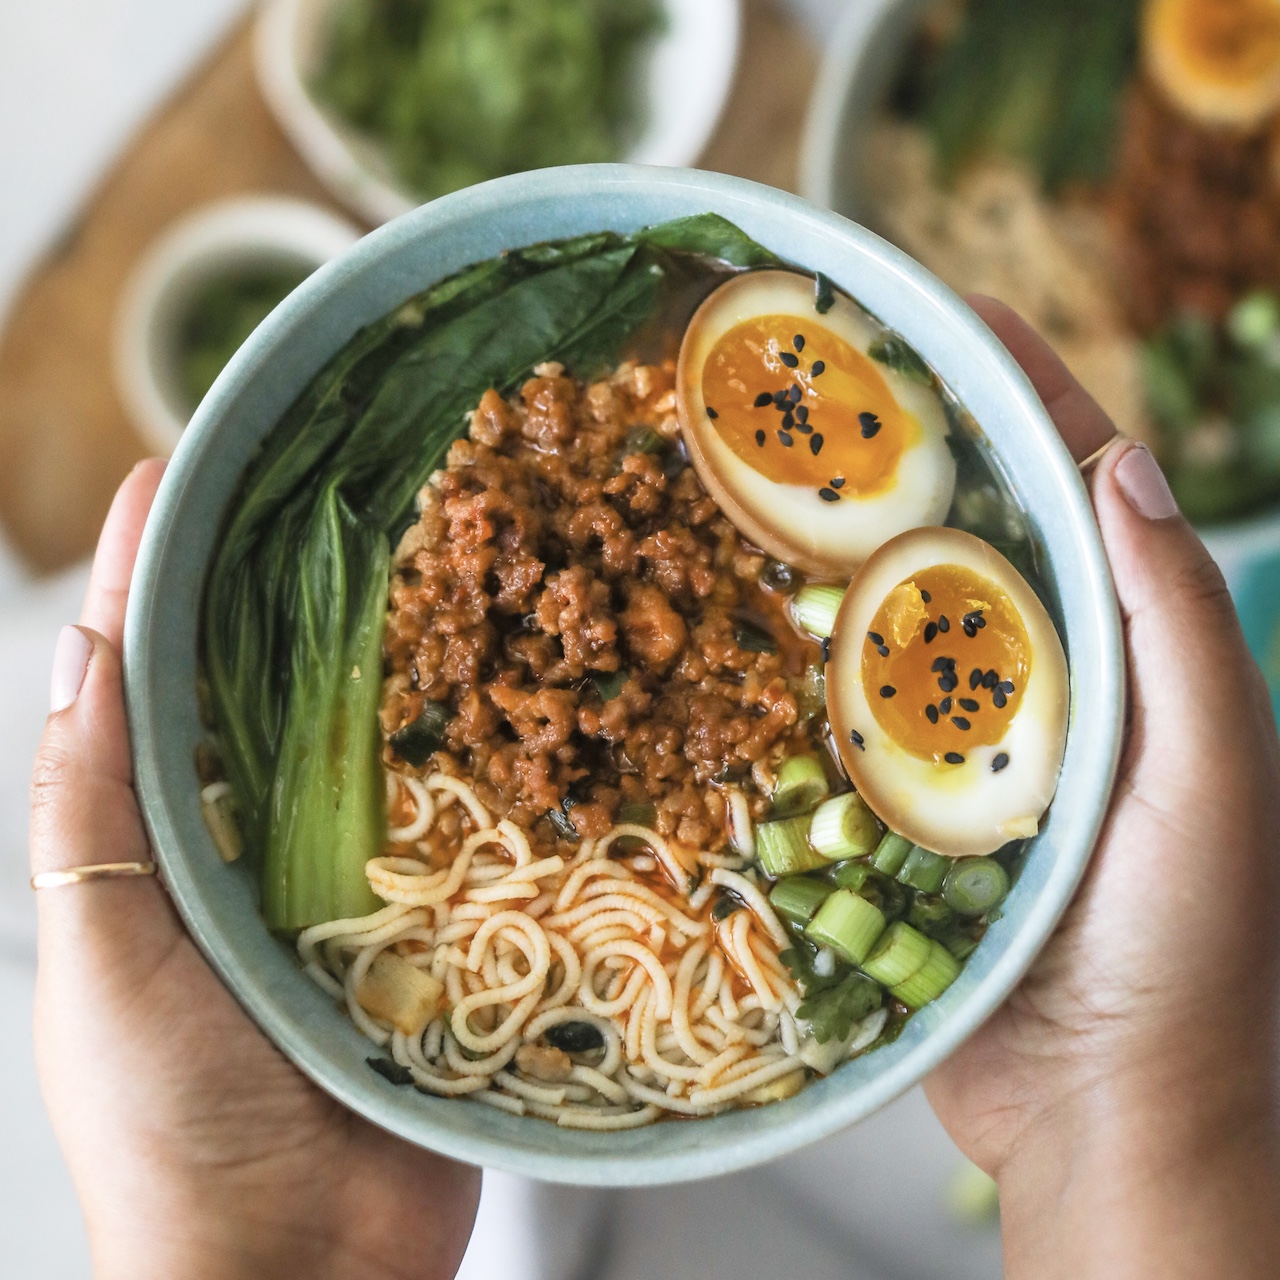 Blue bowl held by two hands with garlic noodle soup cup with spicy ground pork. Out of focus is another blue bowl with recipe and small white bowls with extra toppings for styling purposes.